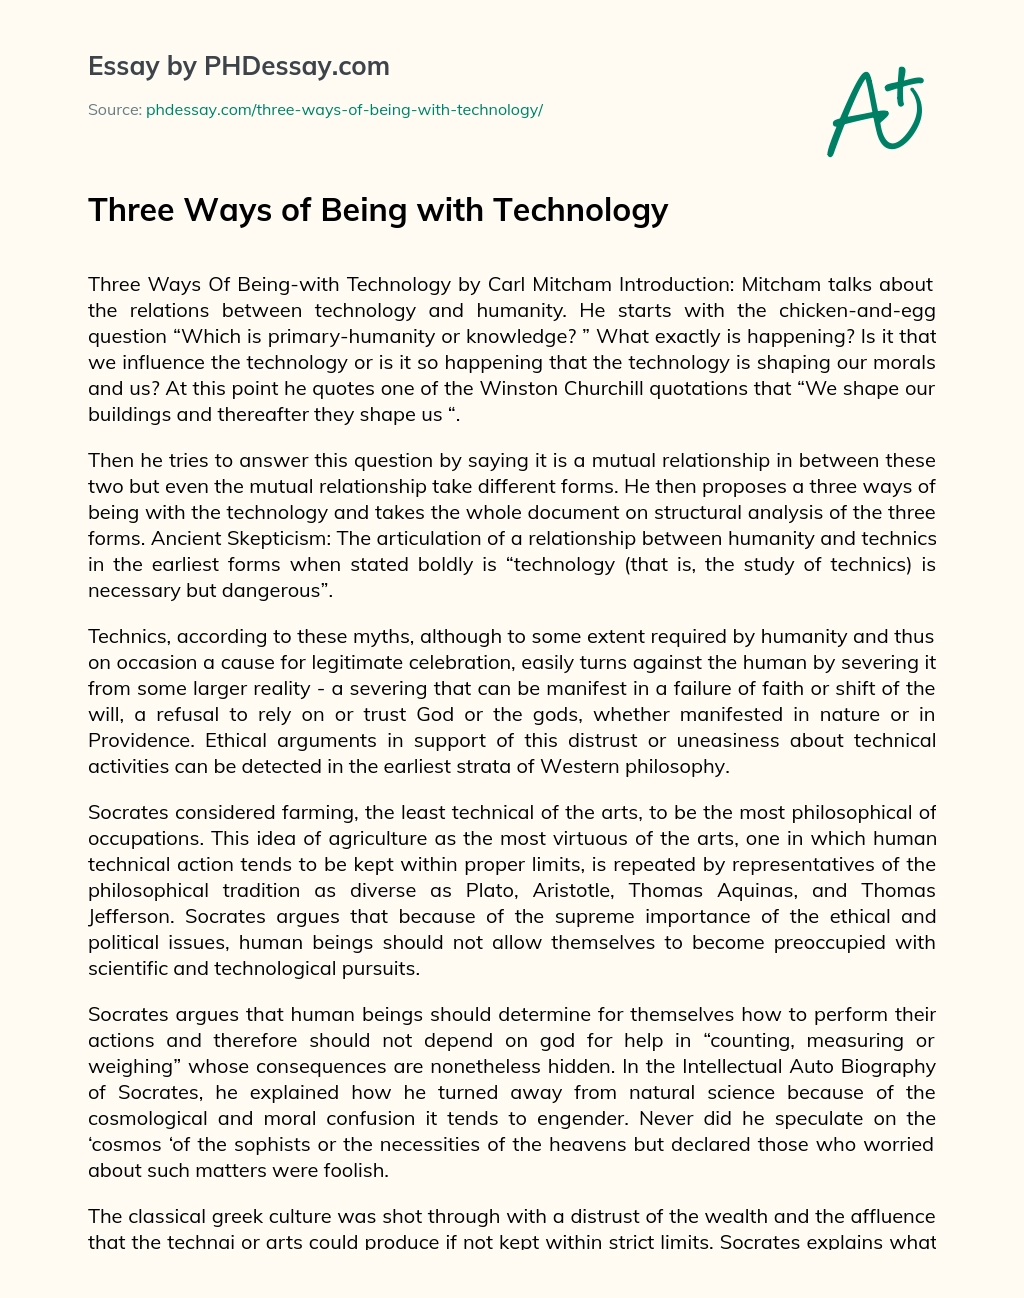 Three Ways of Being with Technology essay